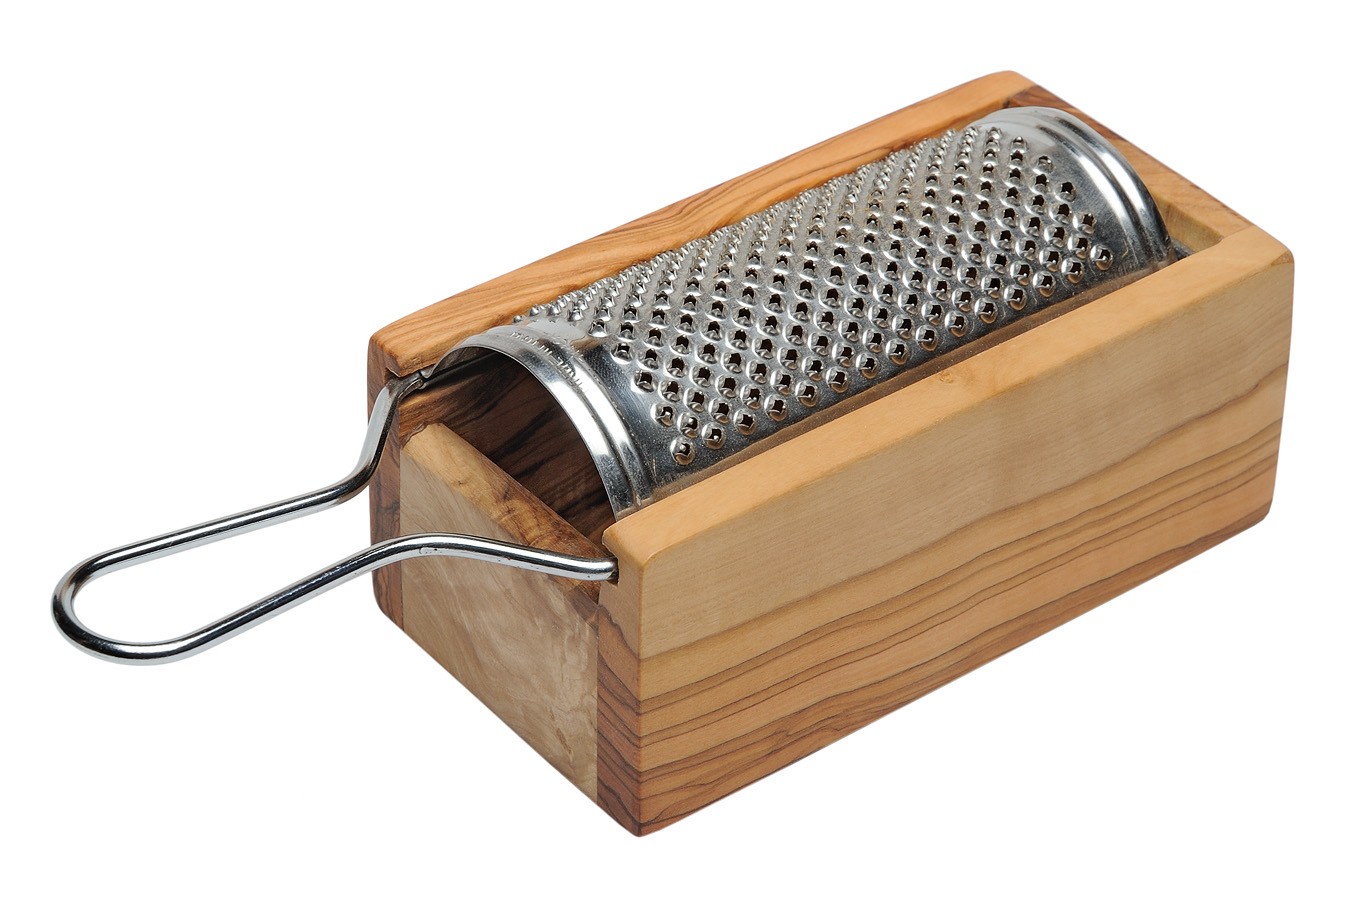 Olive Wood Cheese Grater - Small